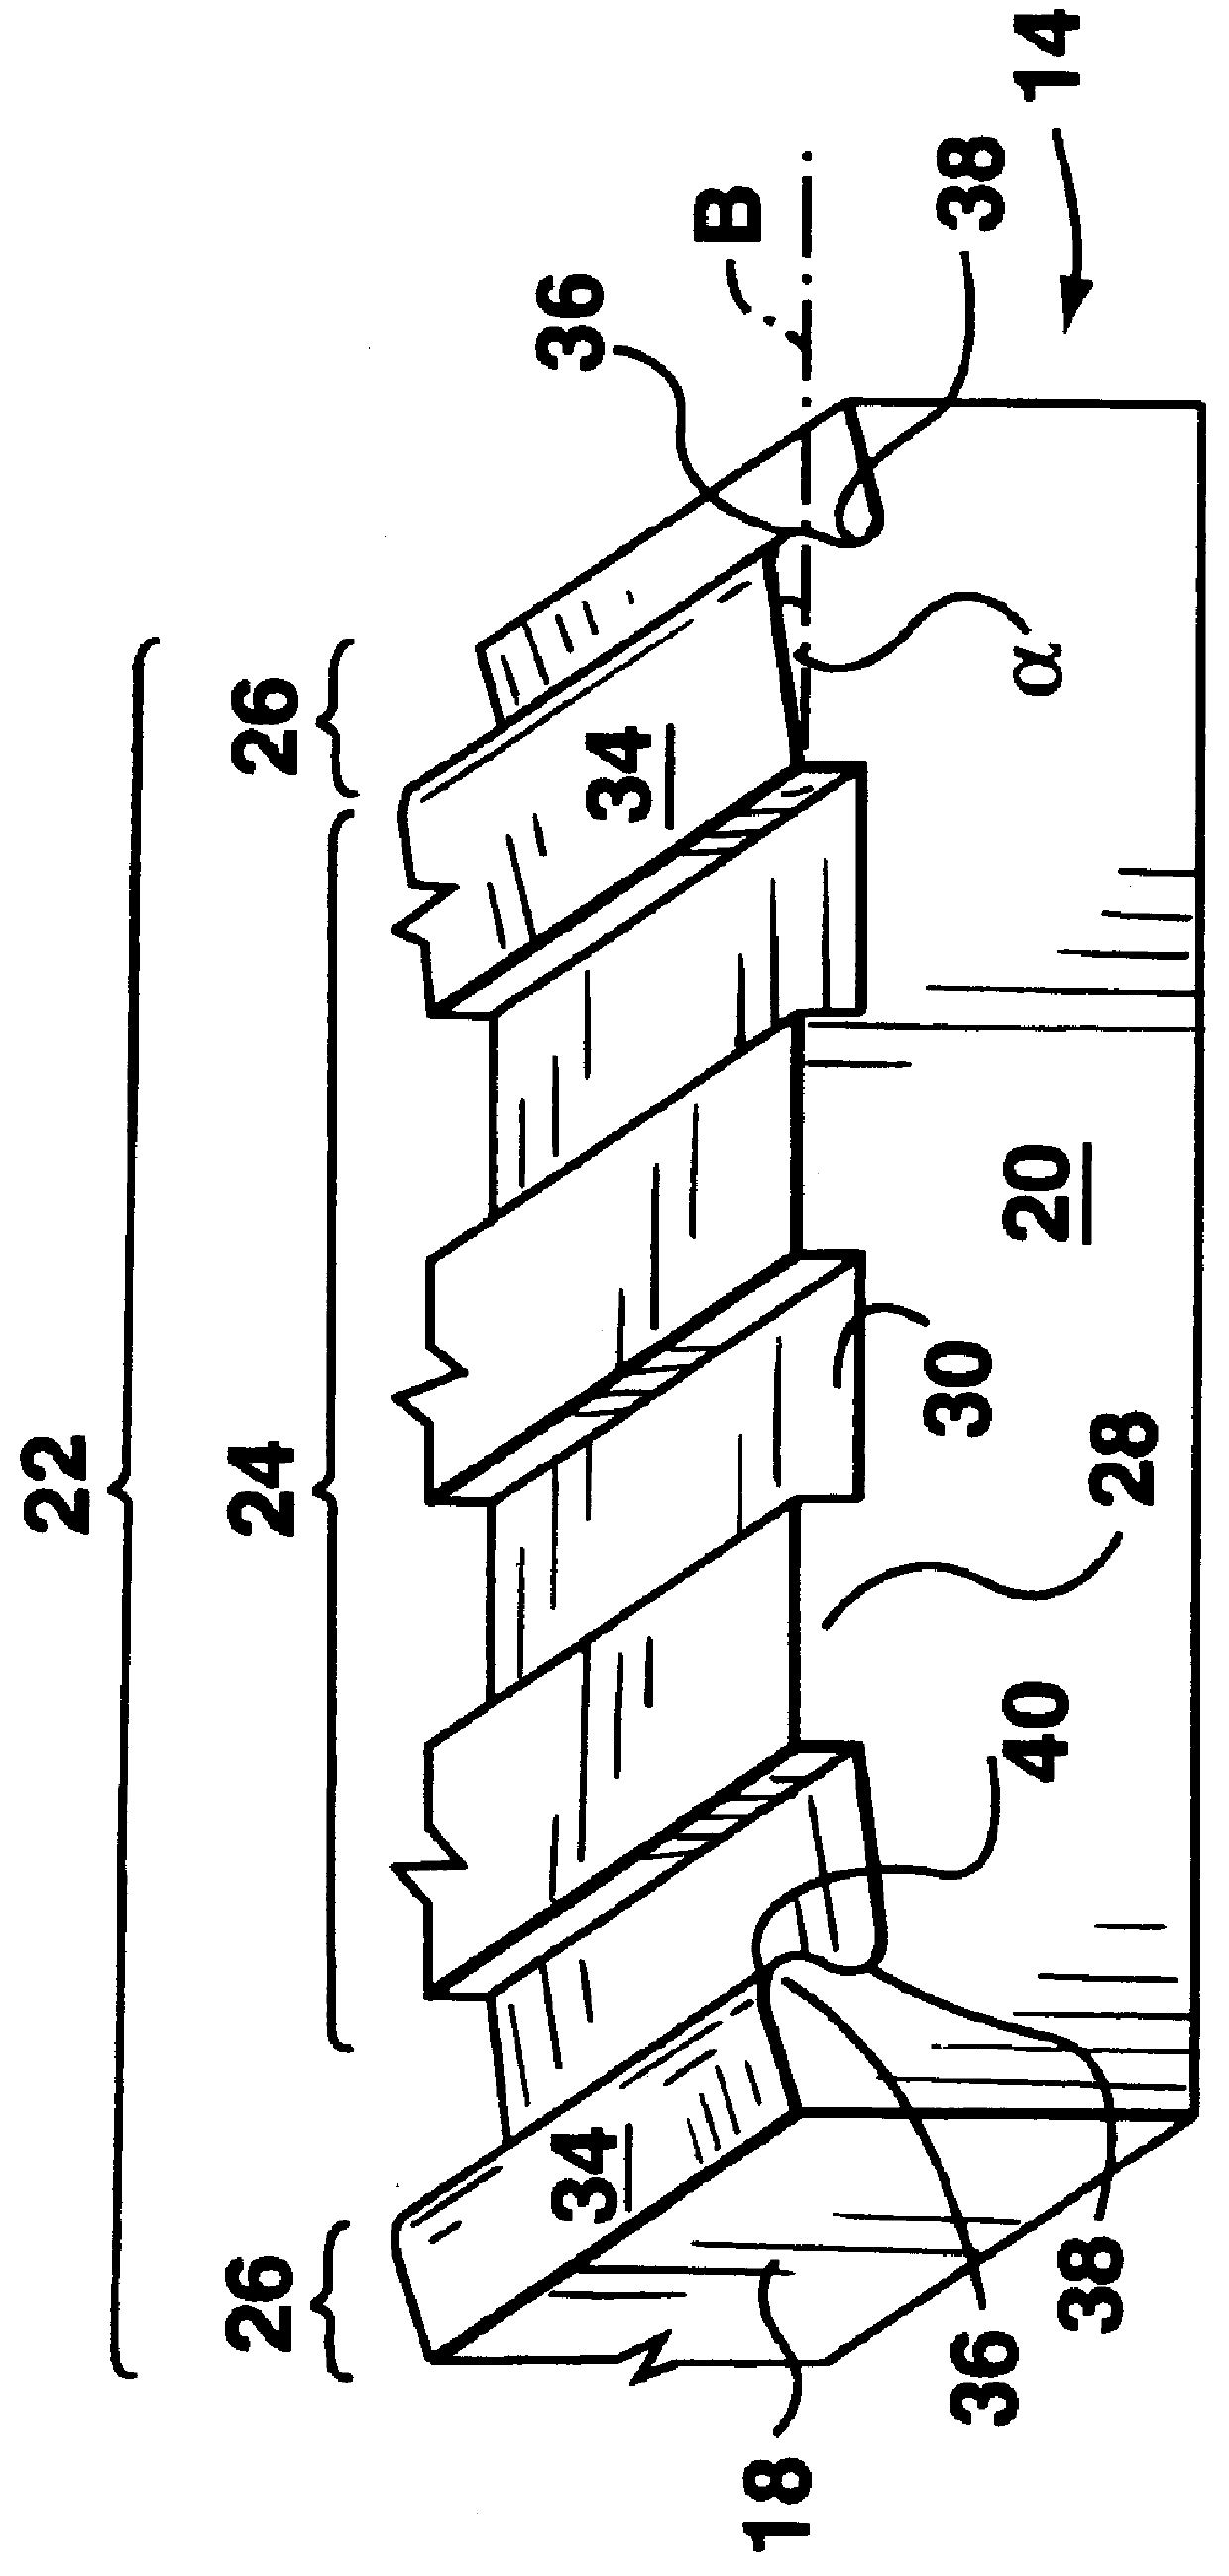 Wood article and method of manufacture